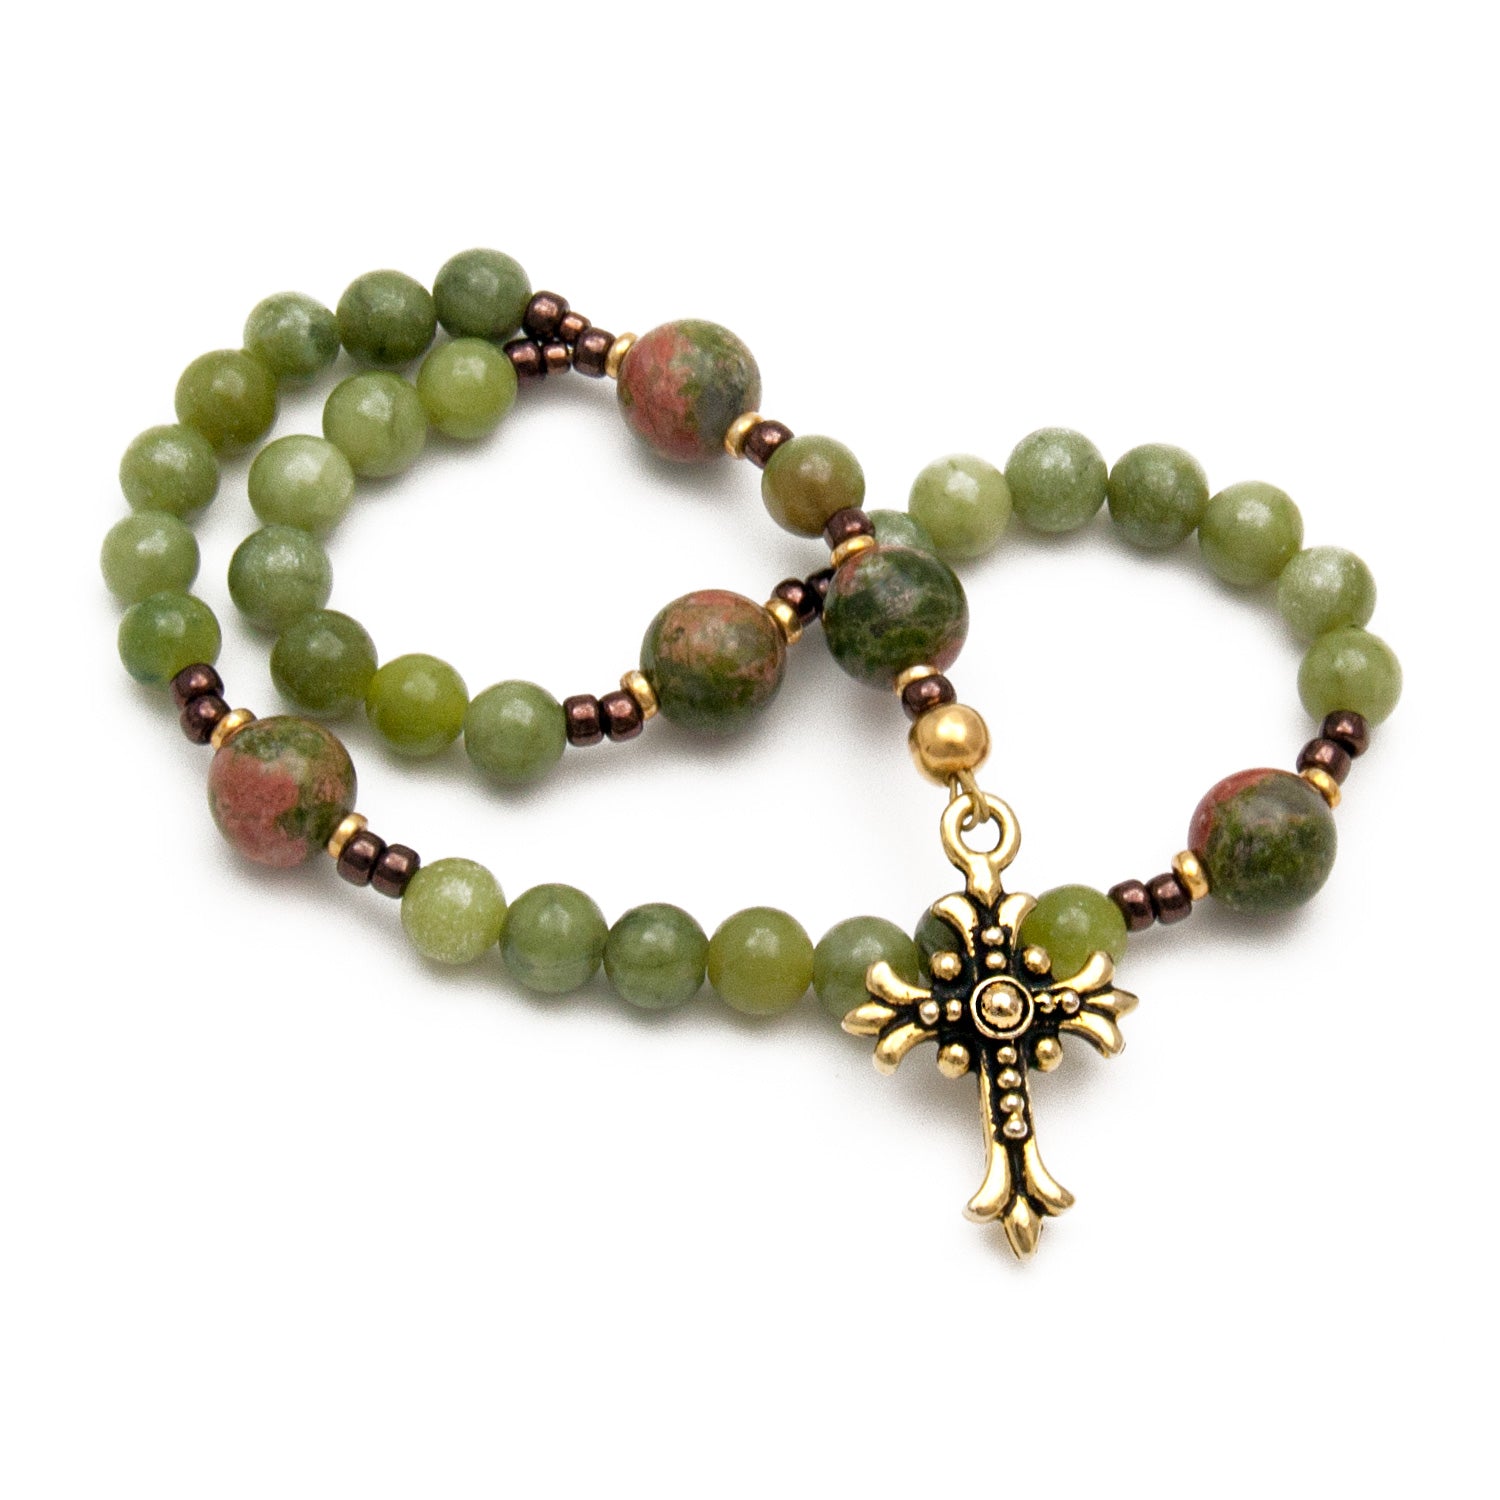 Buy Knotted Anglican Rosary Necklace Online in India - Etsy